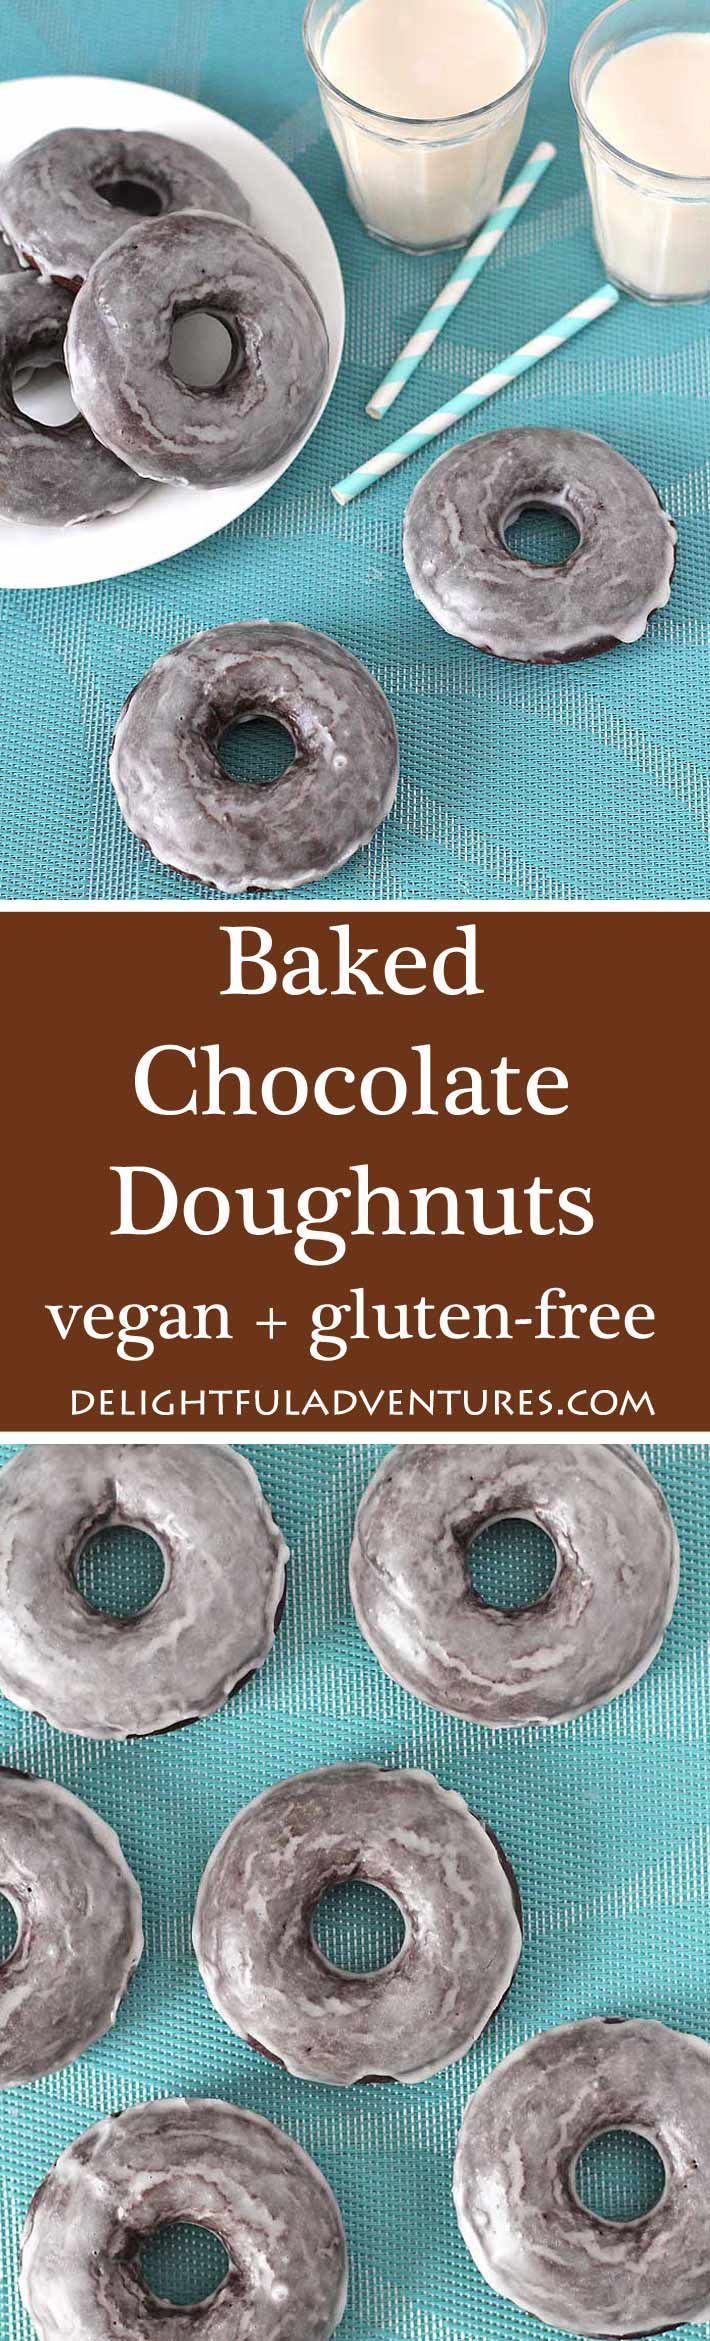 Looking for Vegan Gluten Free Baked Chocolate Doughnuts? Your search has ended. This recipe makes perfectly soft, chocolaty, sweet